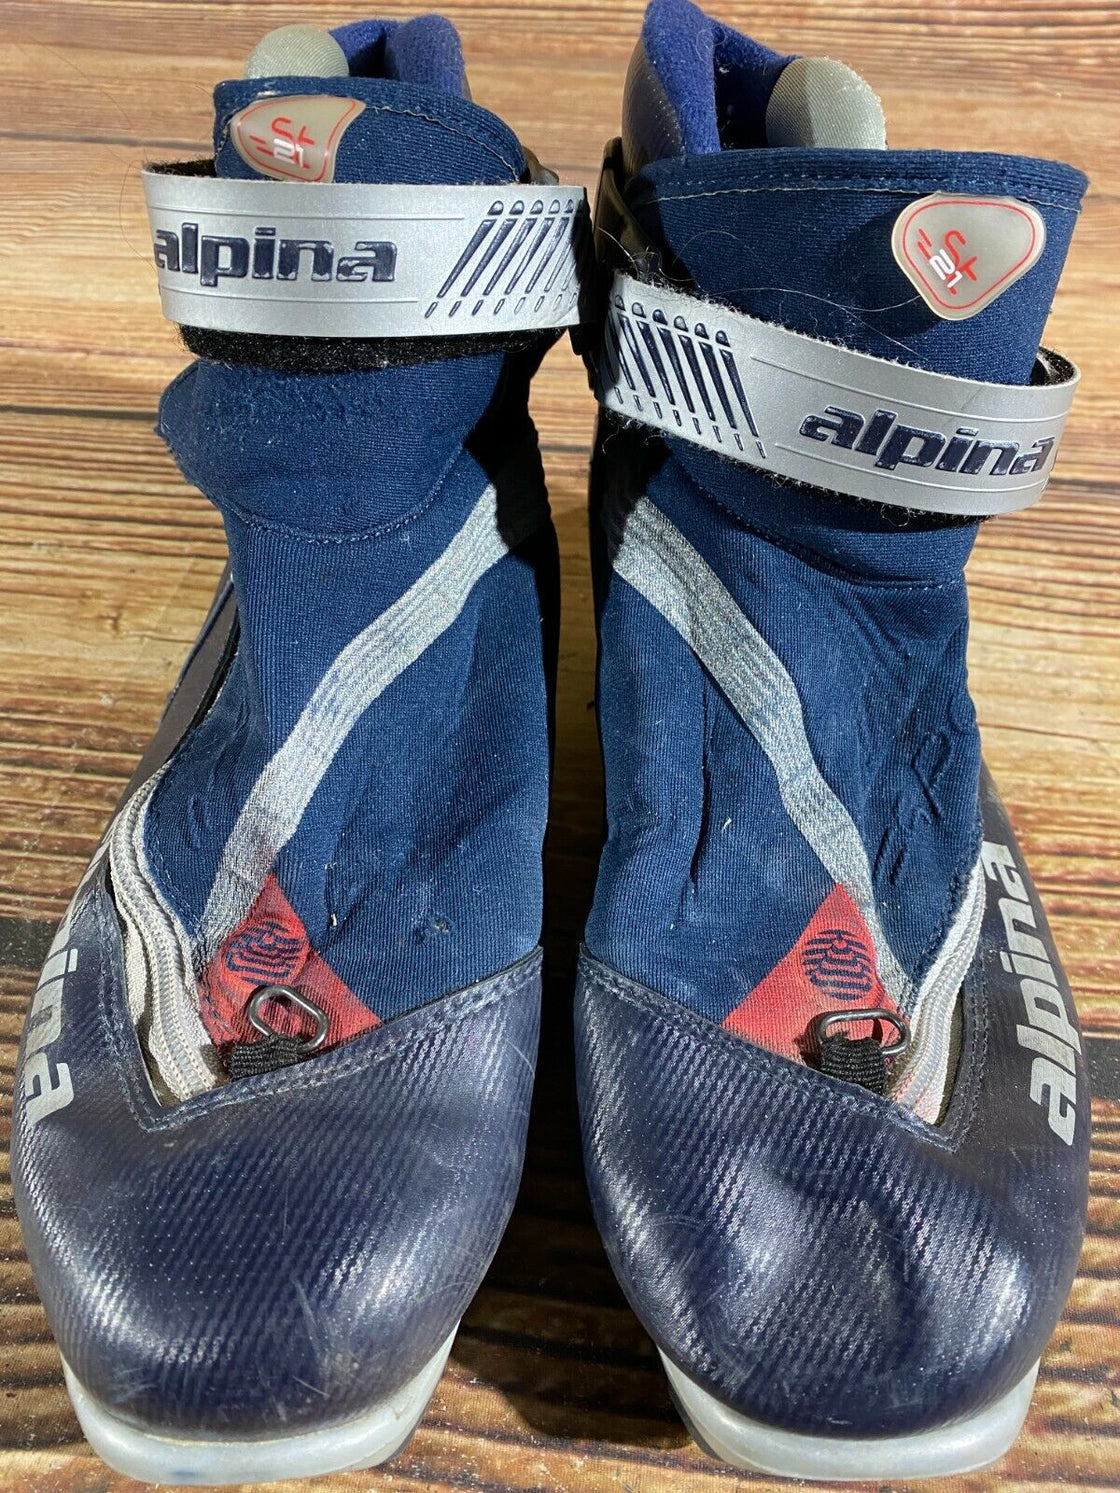 Alpina ST21 Nordic Cross Country Ski Boots Size EU42 US9 for NNN